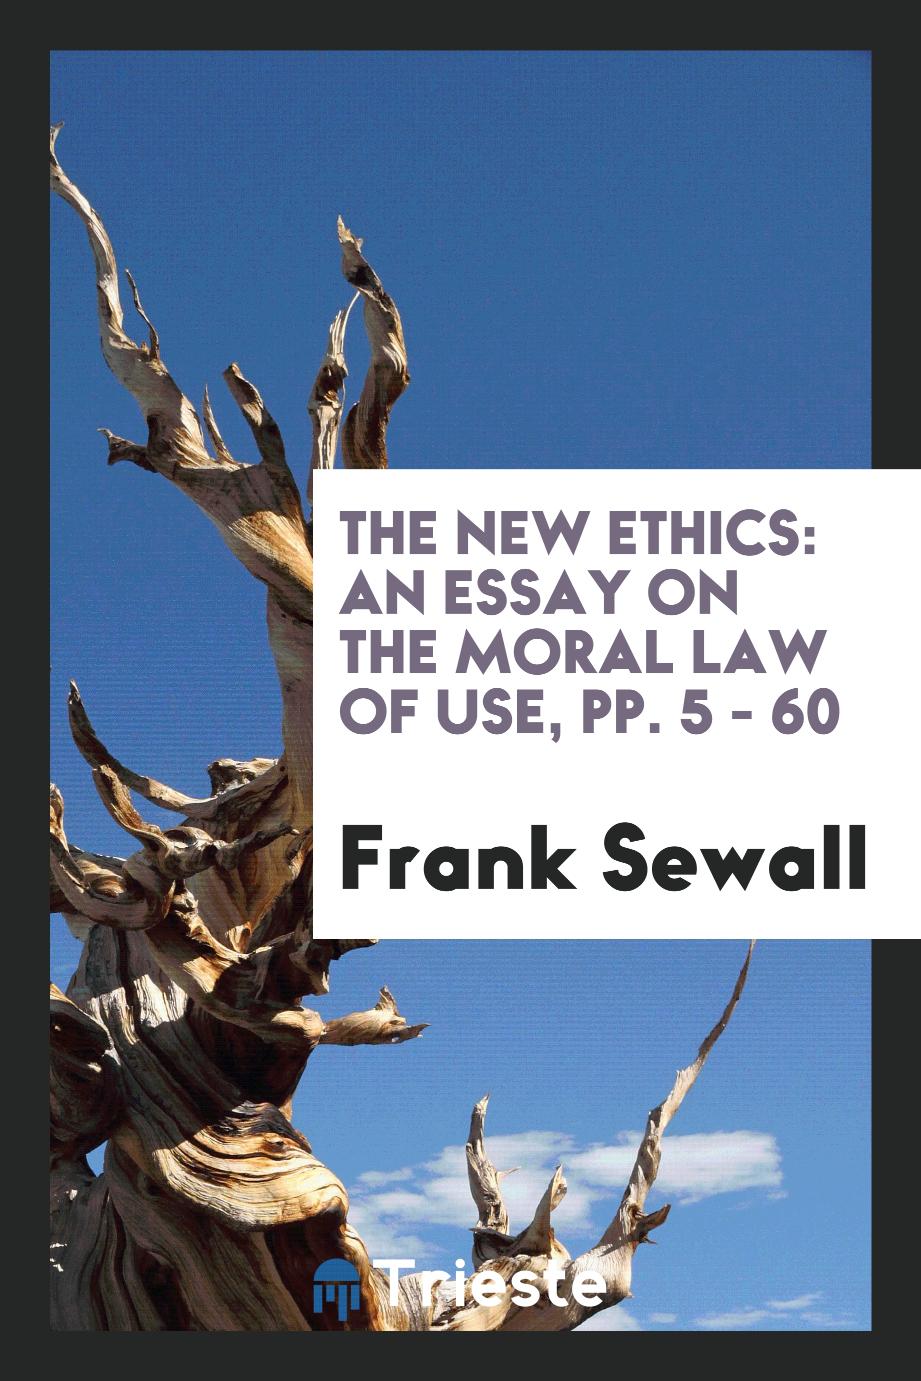 The New Ethics: An Essay on the Moral Law of Use, pp. 5 - 60